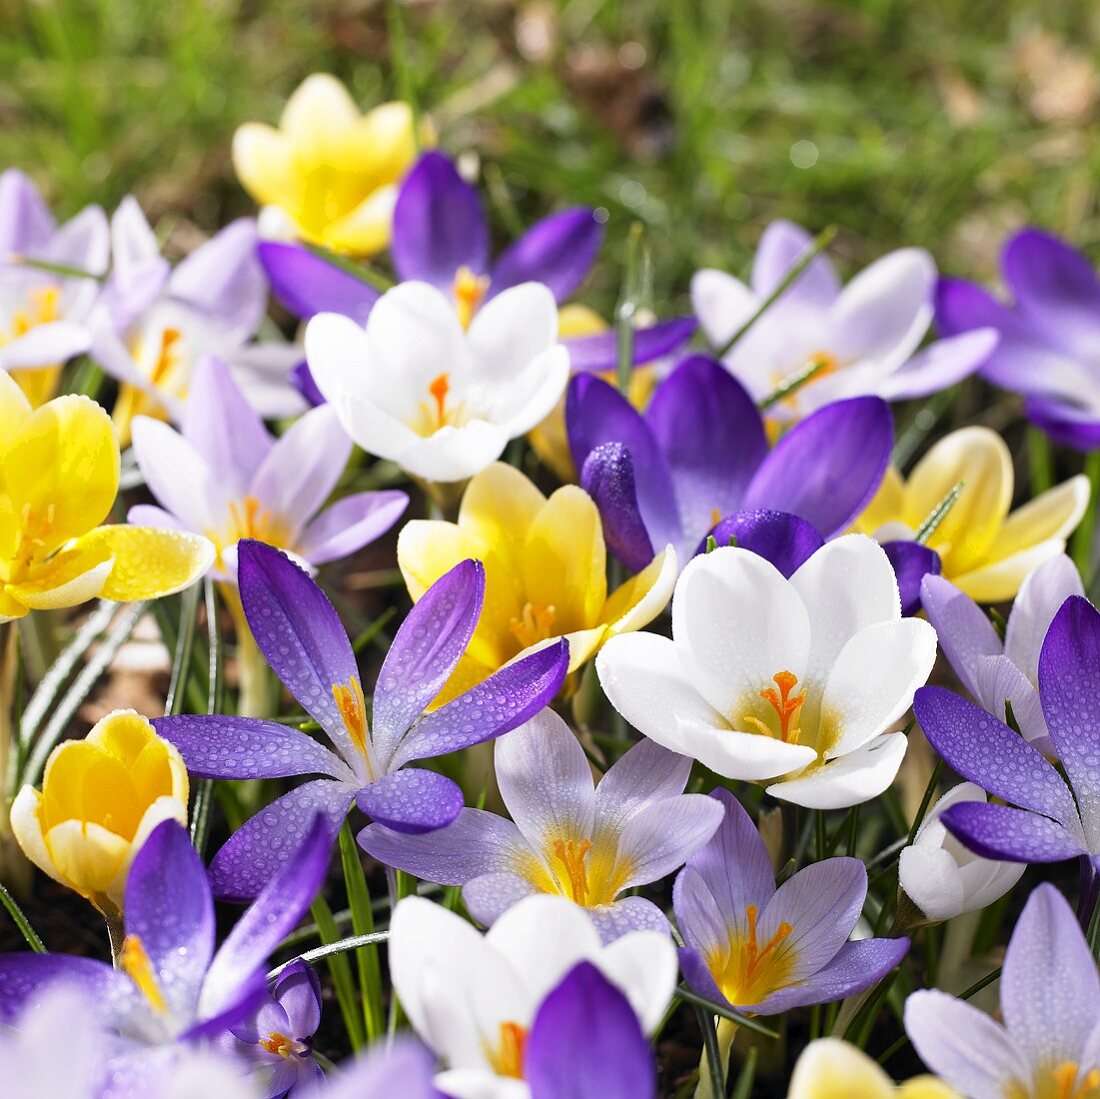 Crocuses of various colours in grass